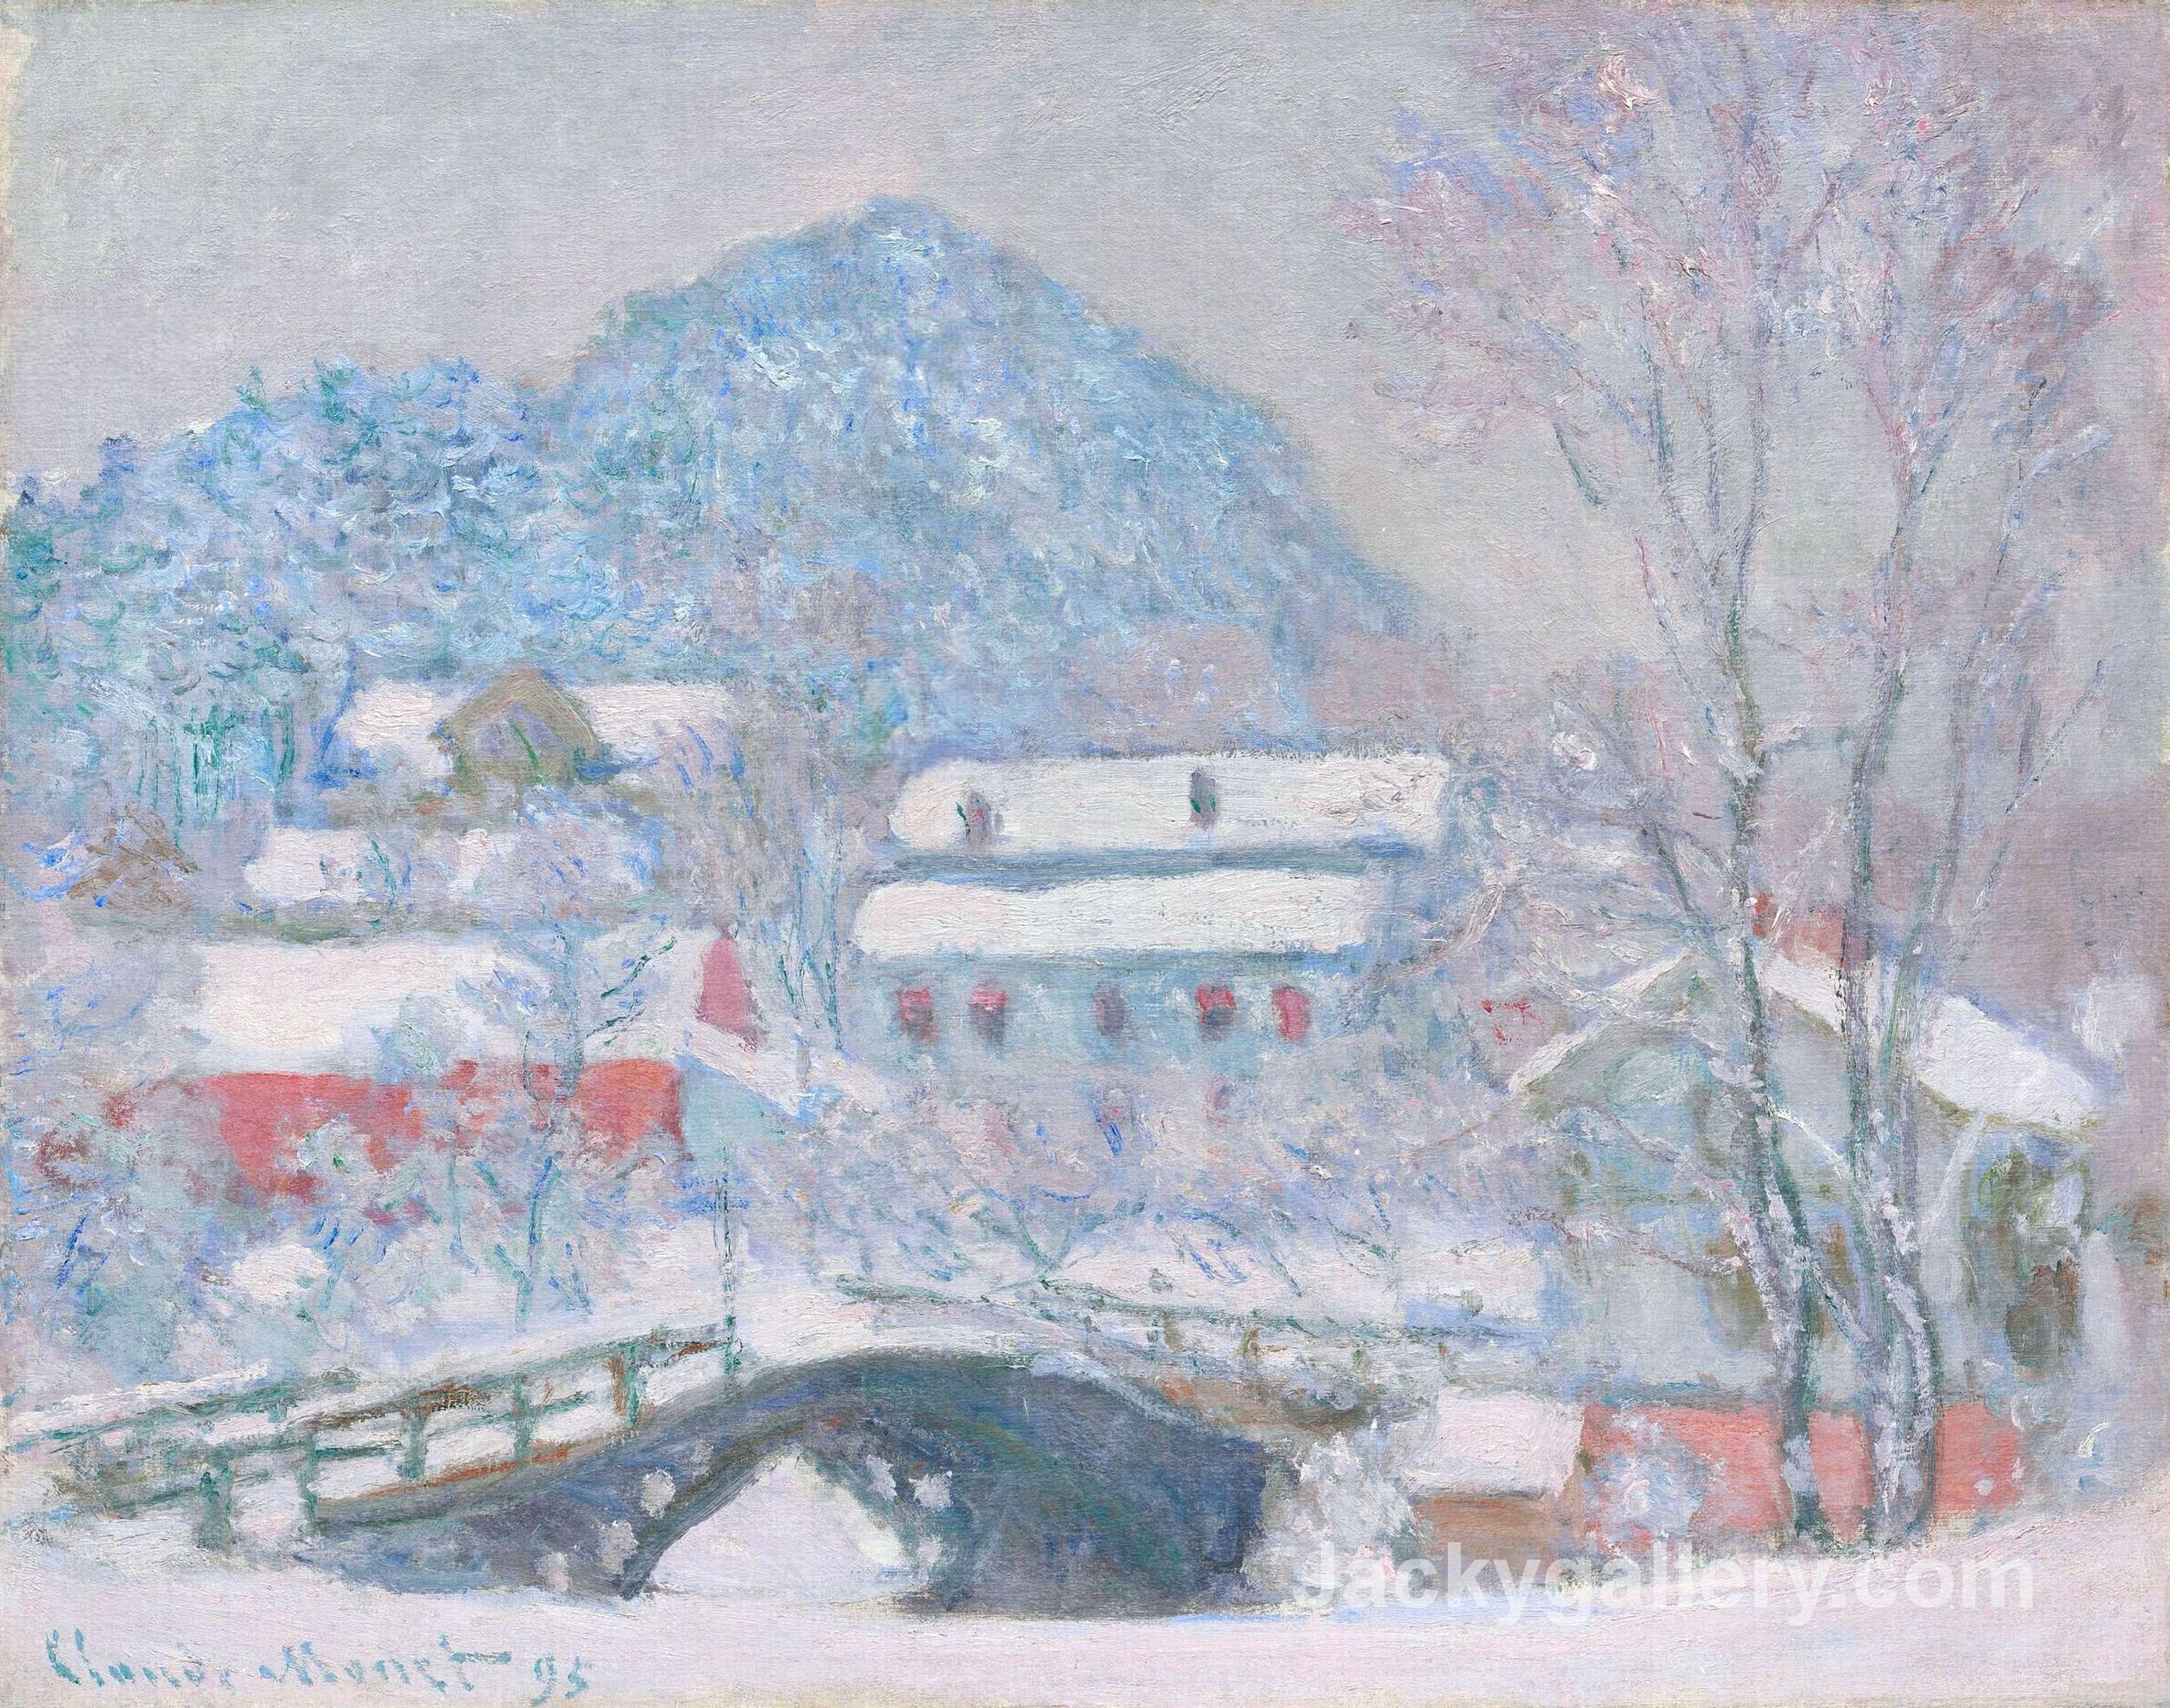 Norway, Sandviken Village in the Snow by Claude Monet paintings reproduction